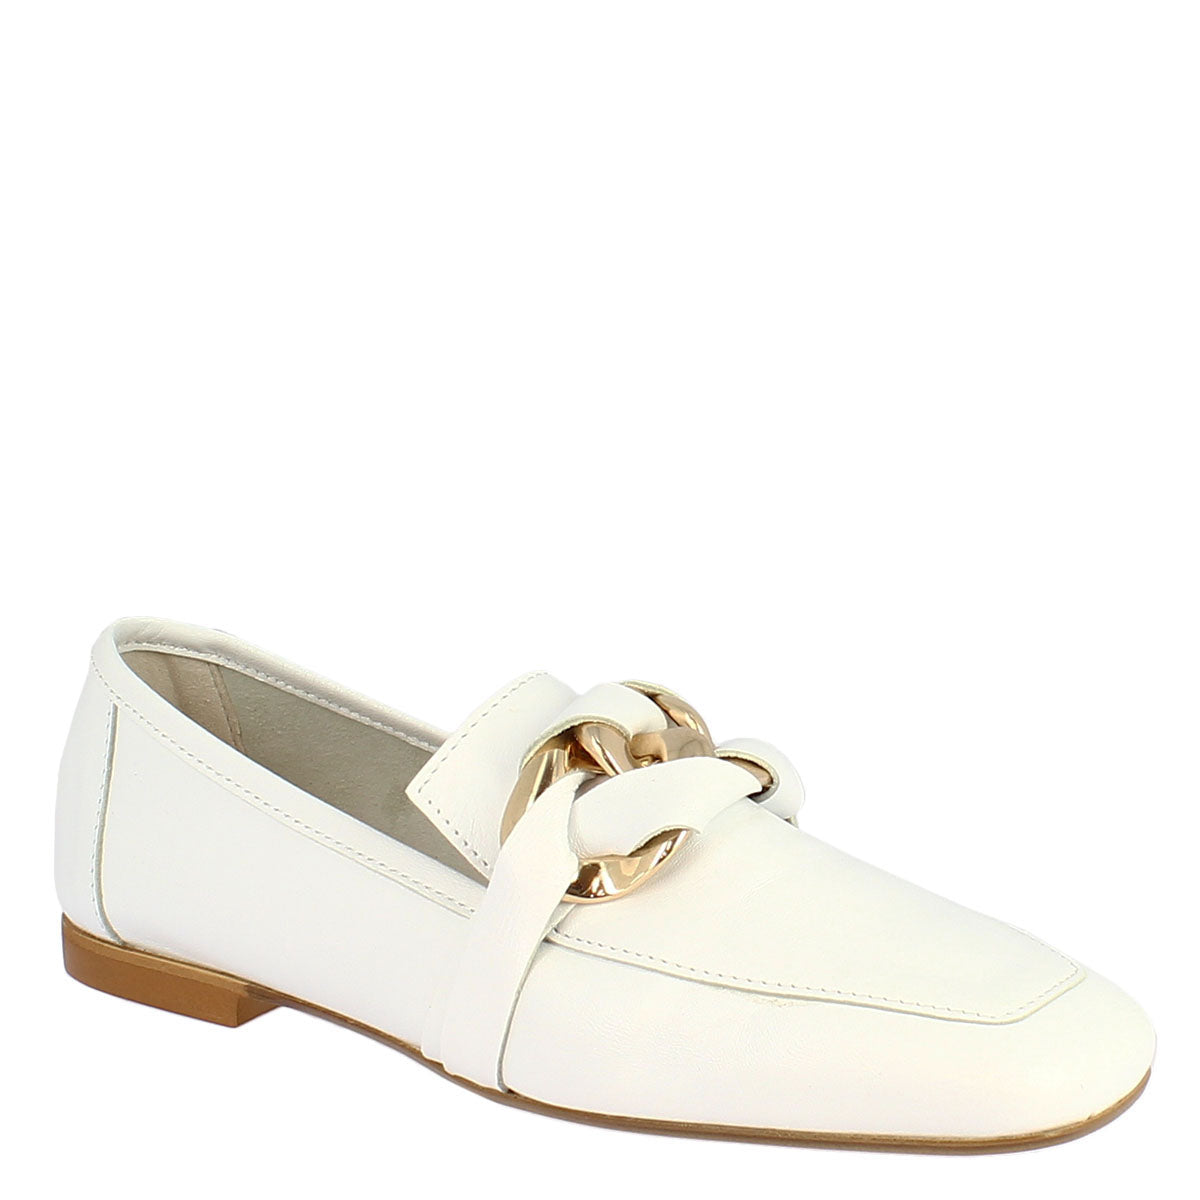 Women's moccasin in white calf leather handmade with decorated clamp.